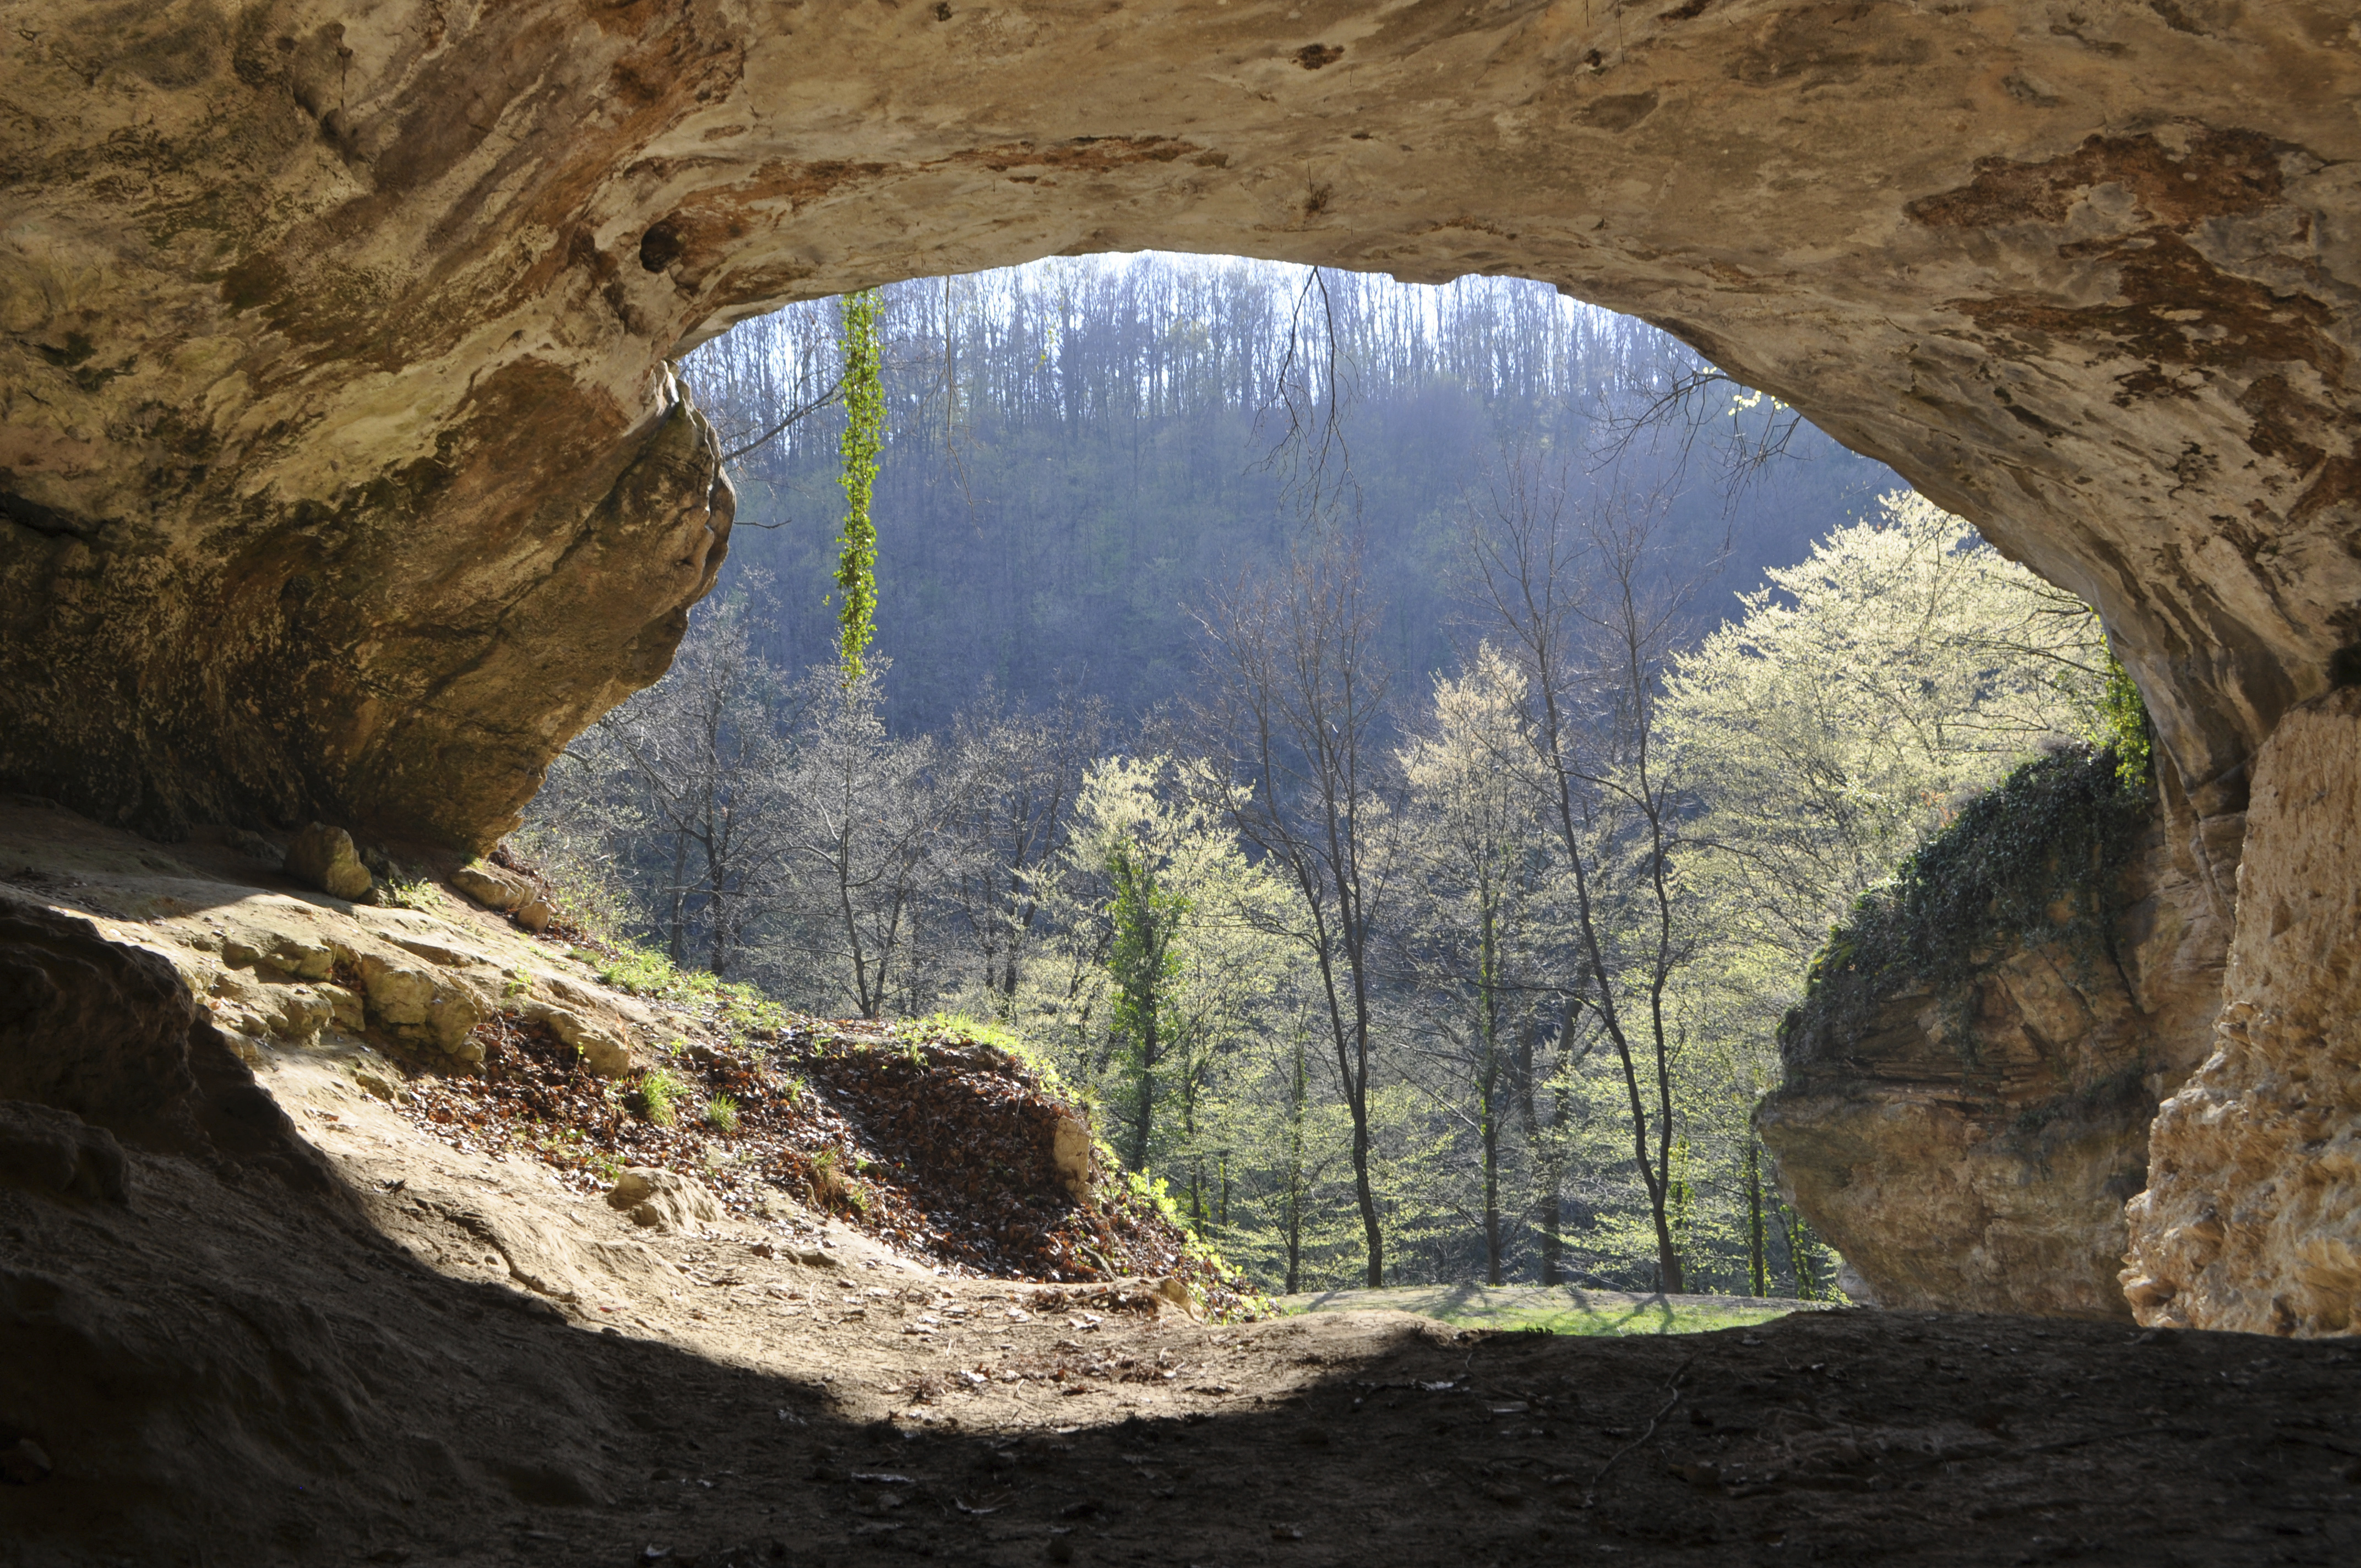 Scientists have succeeded in extracting DNA of ancient humans from sediment in the Vindija Cave in Croatia. (Johannes Krause—Max Planck Institute for Evolutionary Anthropology/AP)